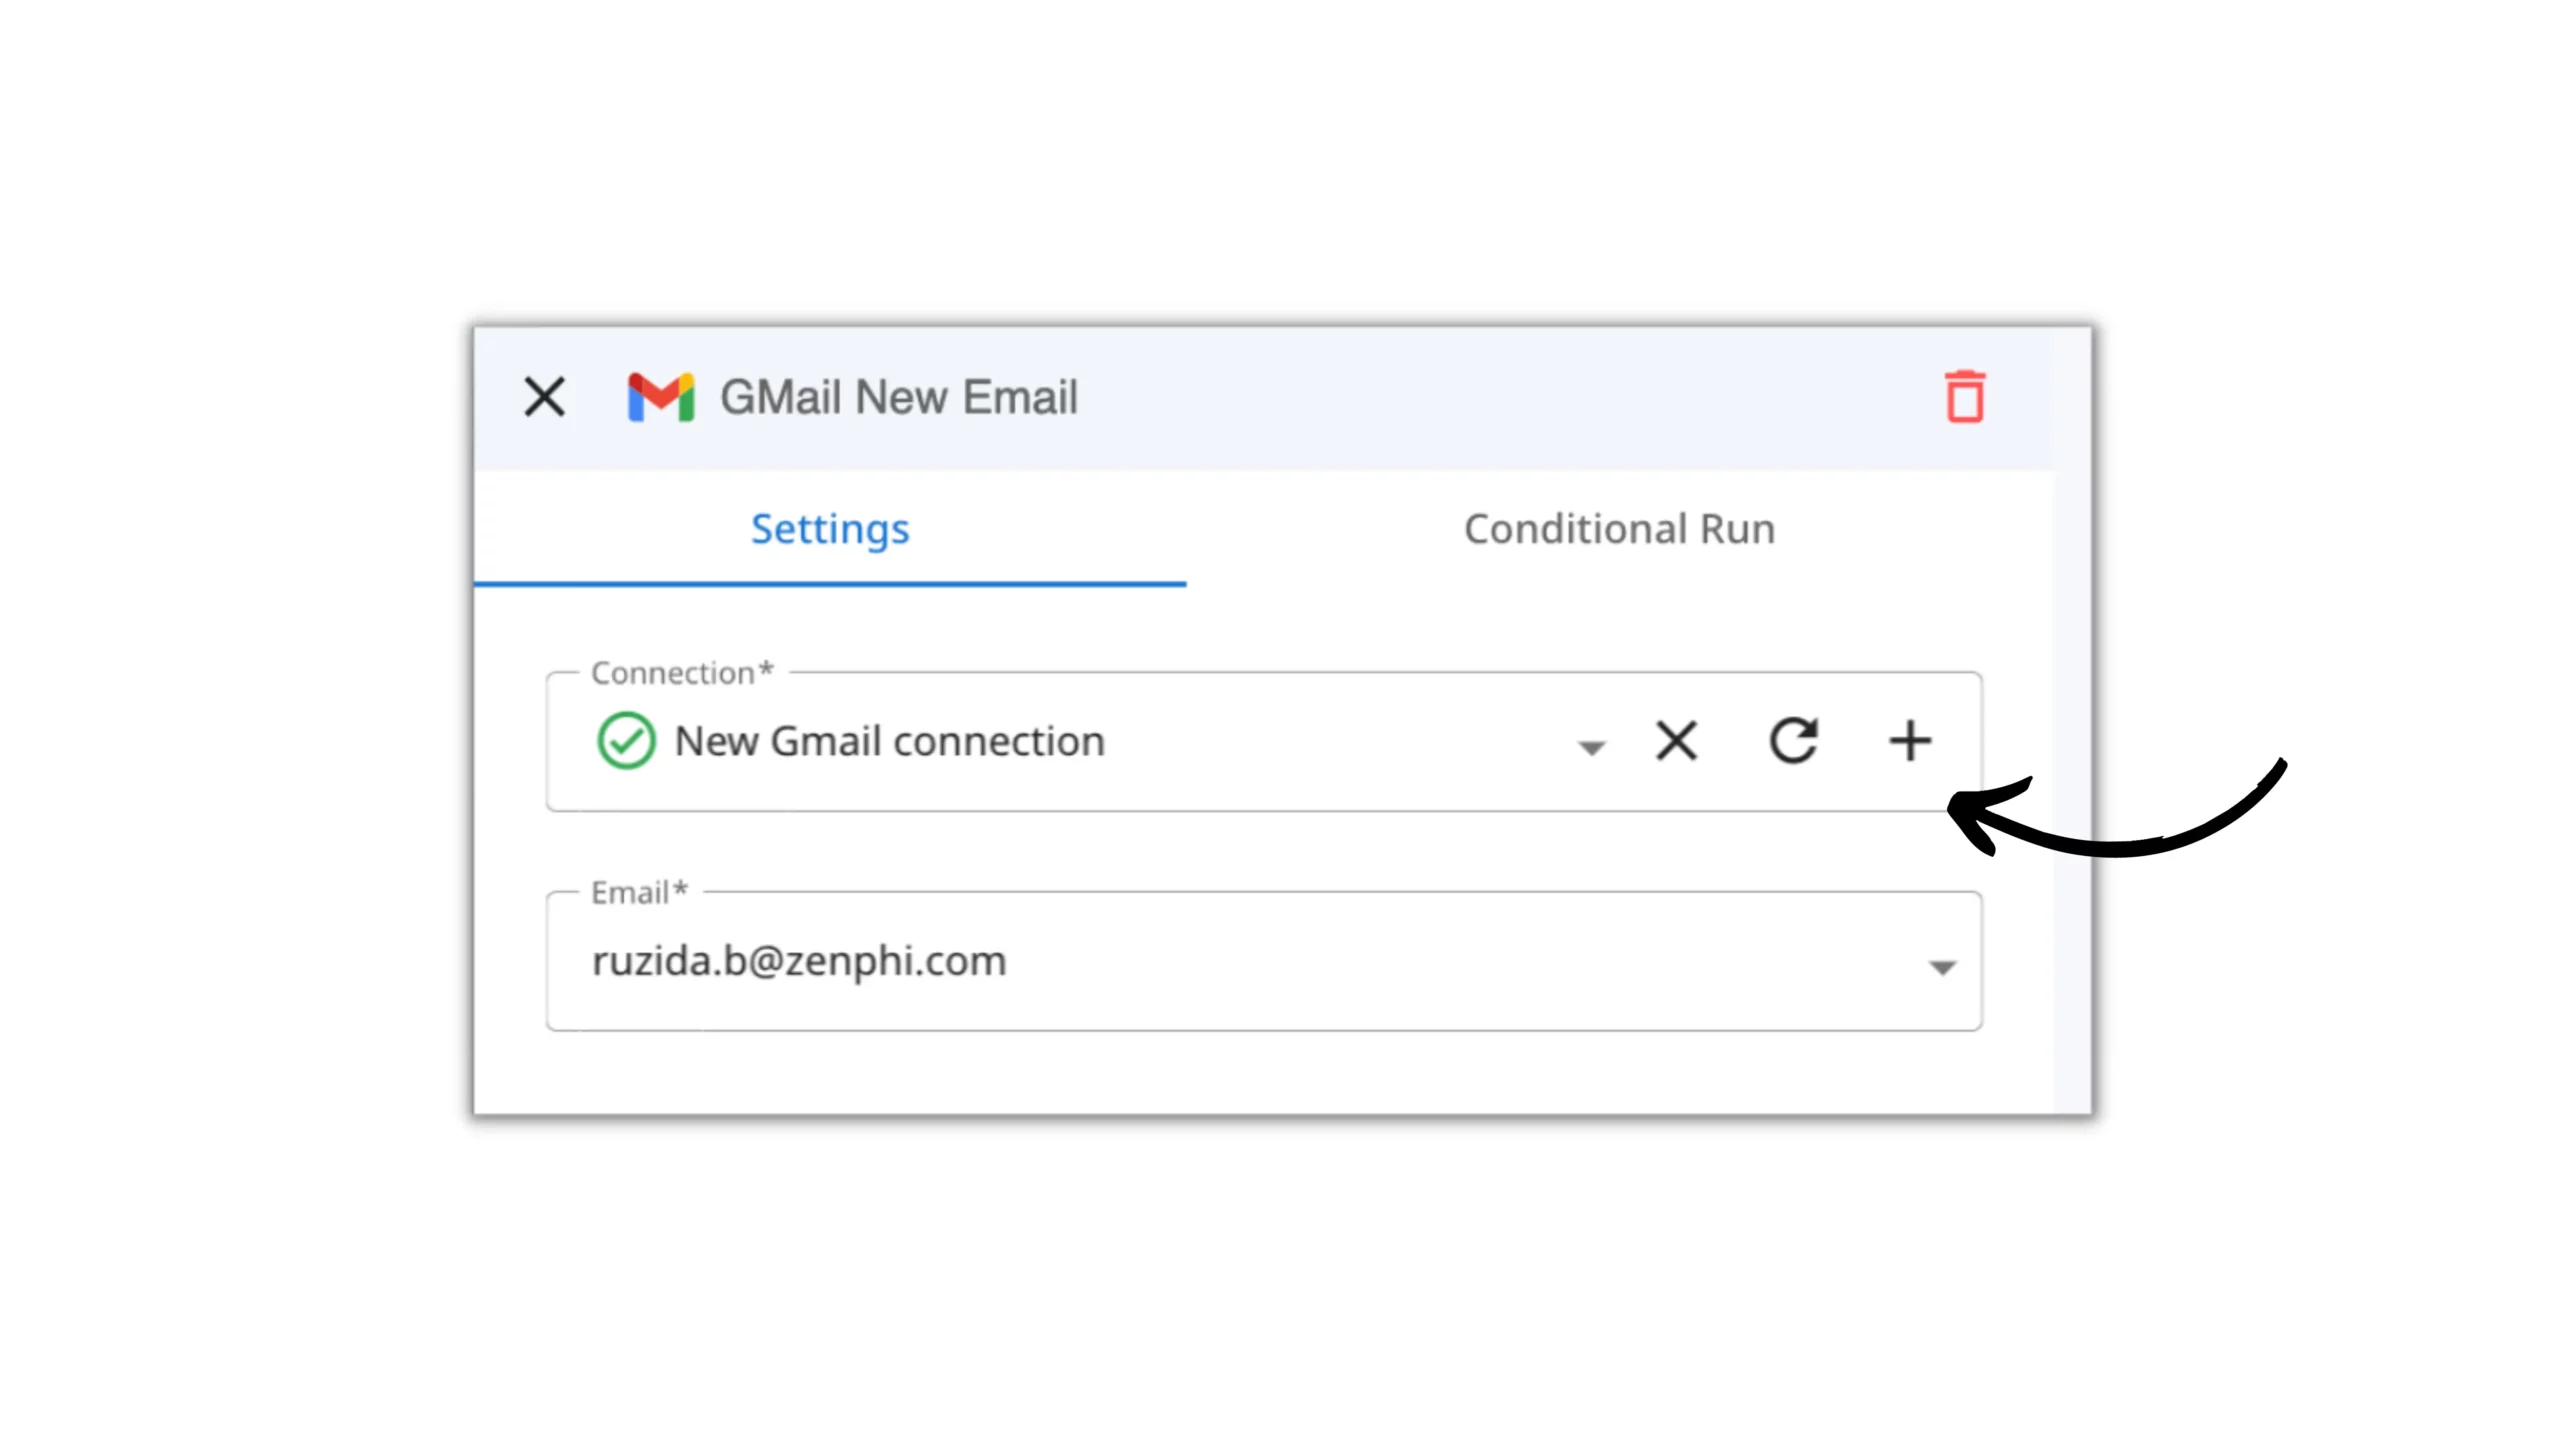 Setting up the email arrival trigger